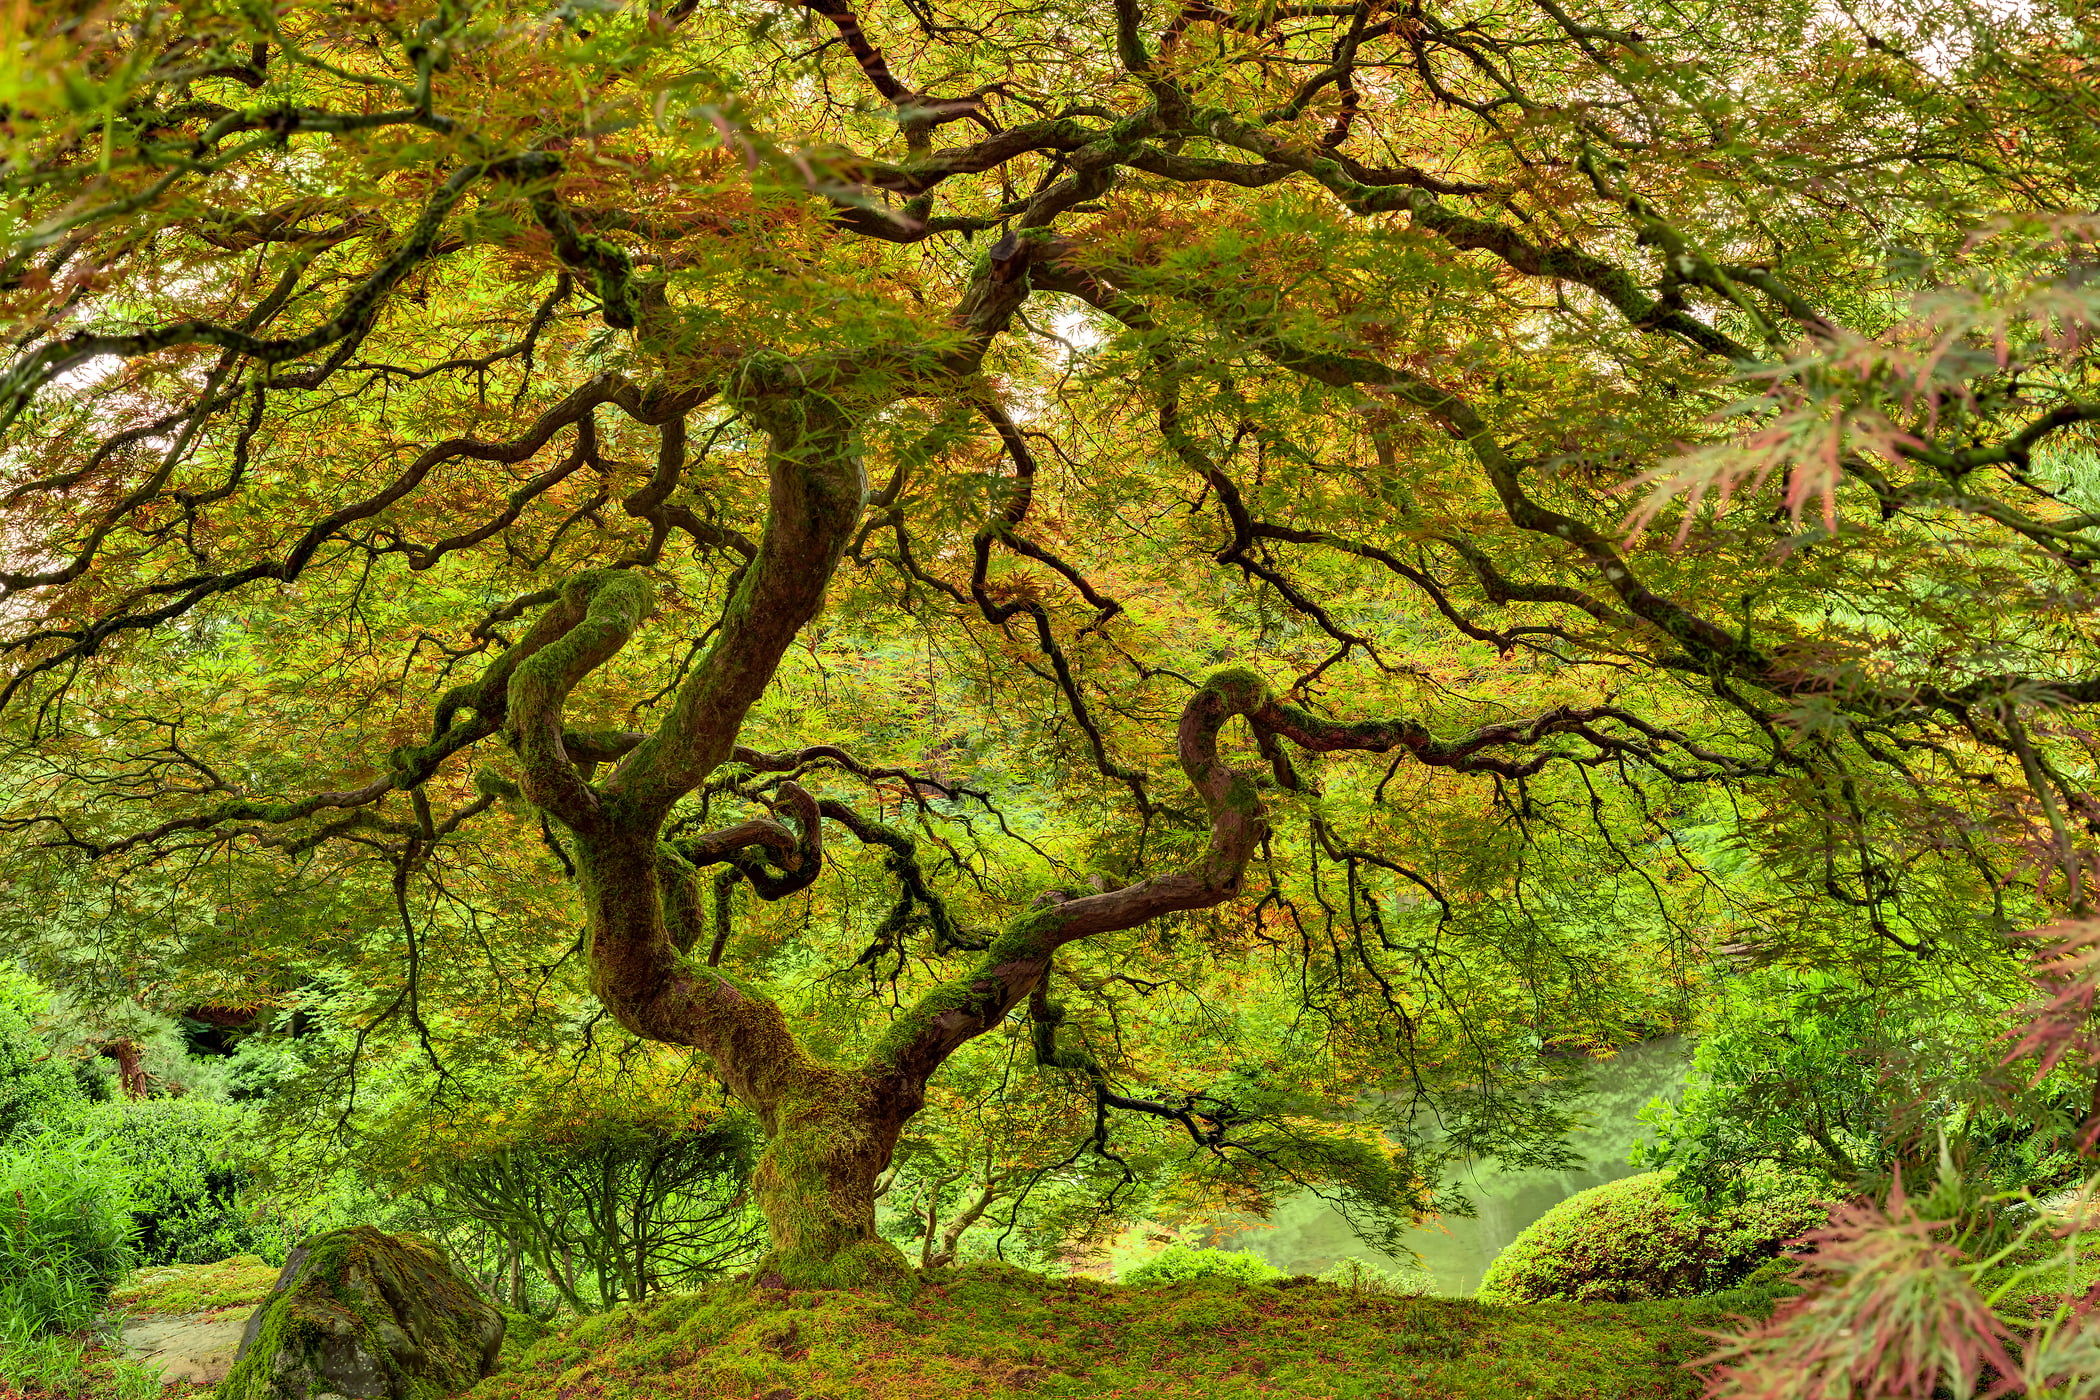 246 megapixels! A very high resolution, large-format VAST photo print of a maple tree in a Japanese garden; photograph created by Tim Lo Monaco in Portland Japanese Garden, Washington Park, Portland, Oregon